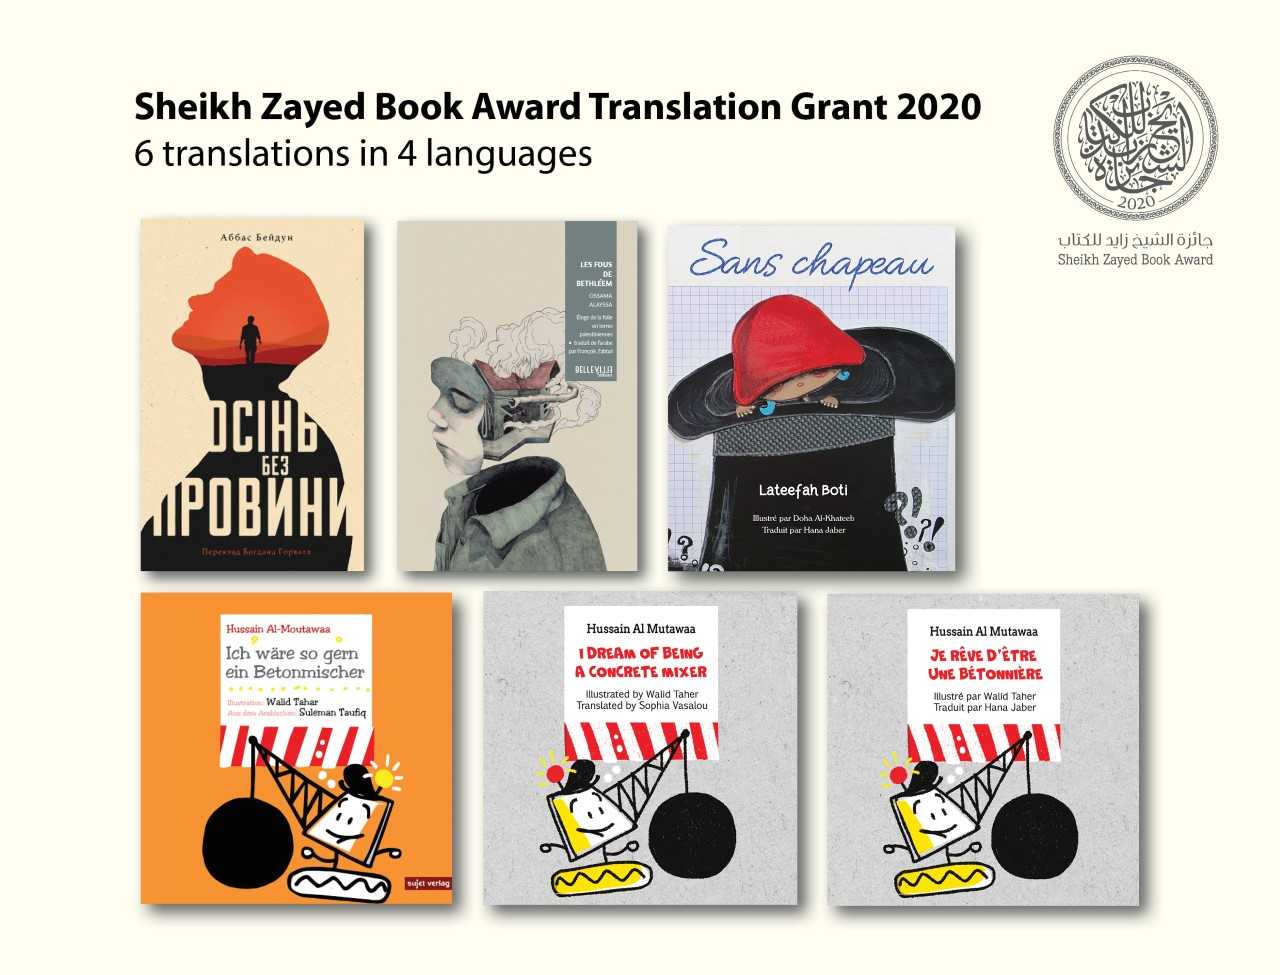 Sheikh Zayed Book Award Releases Multiple Translations Of Its Winning Titles